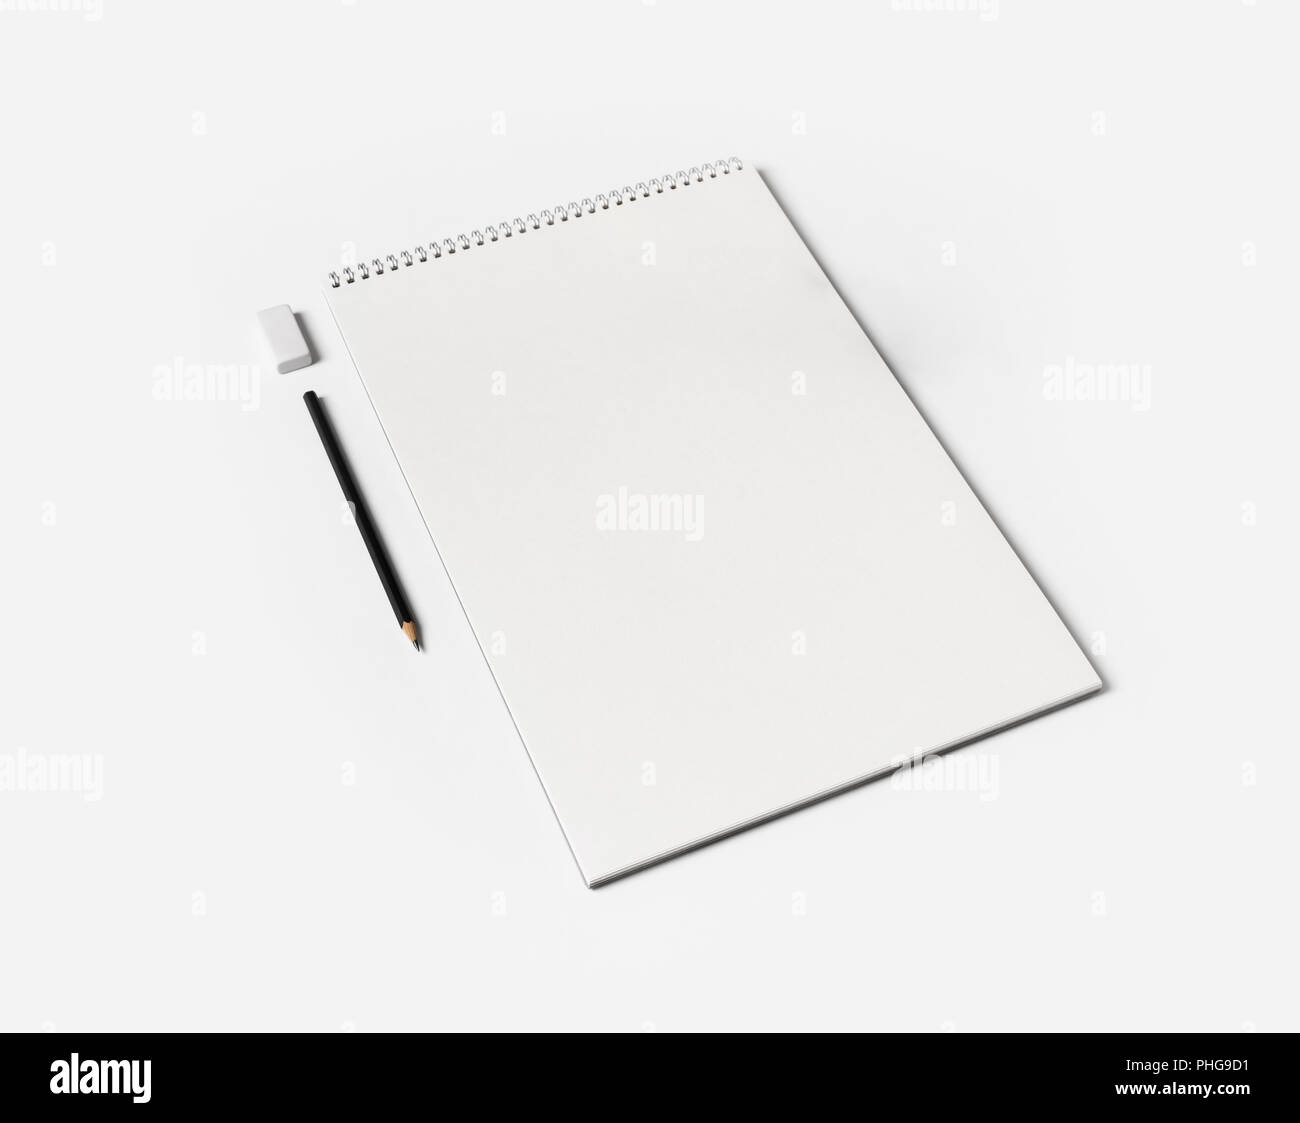 Pen Ink Eraser Isolated on White Background. Erasing concept. Copy space  Stock Photo - Alamy